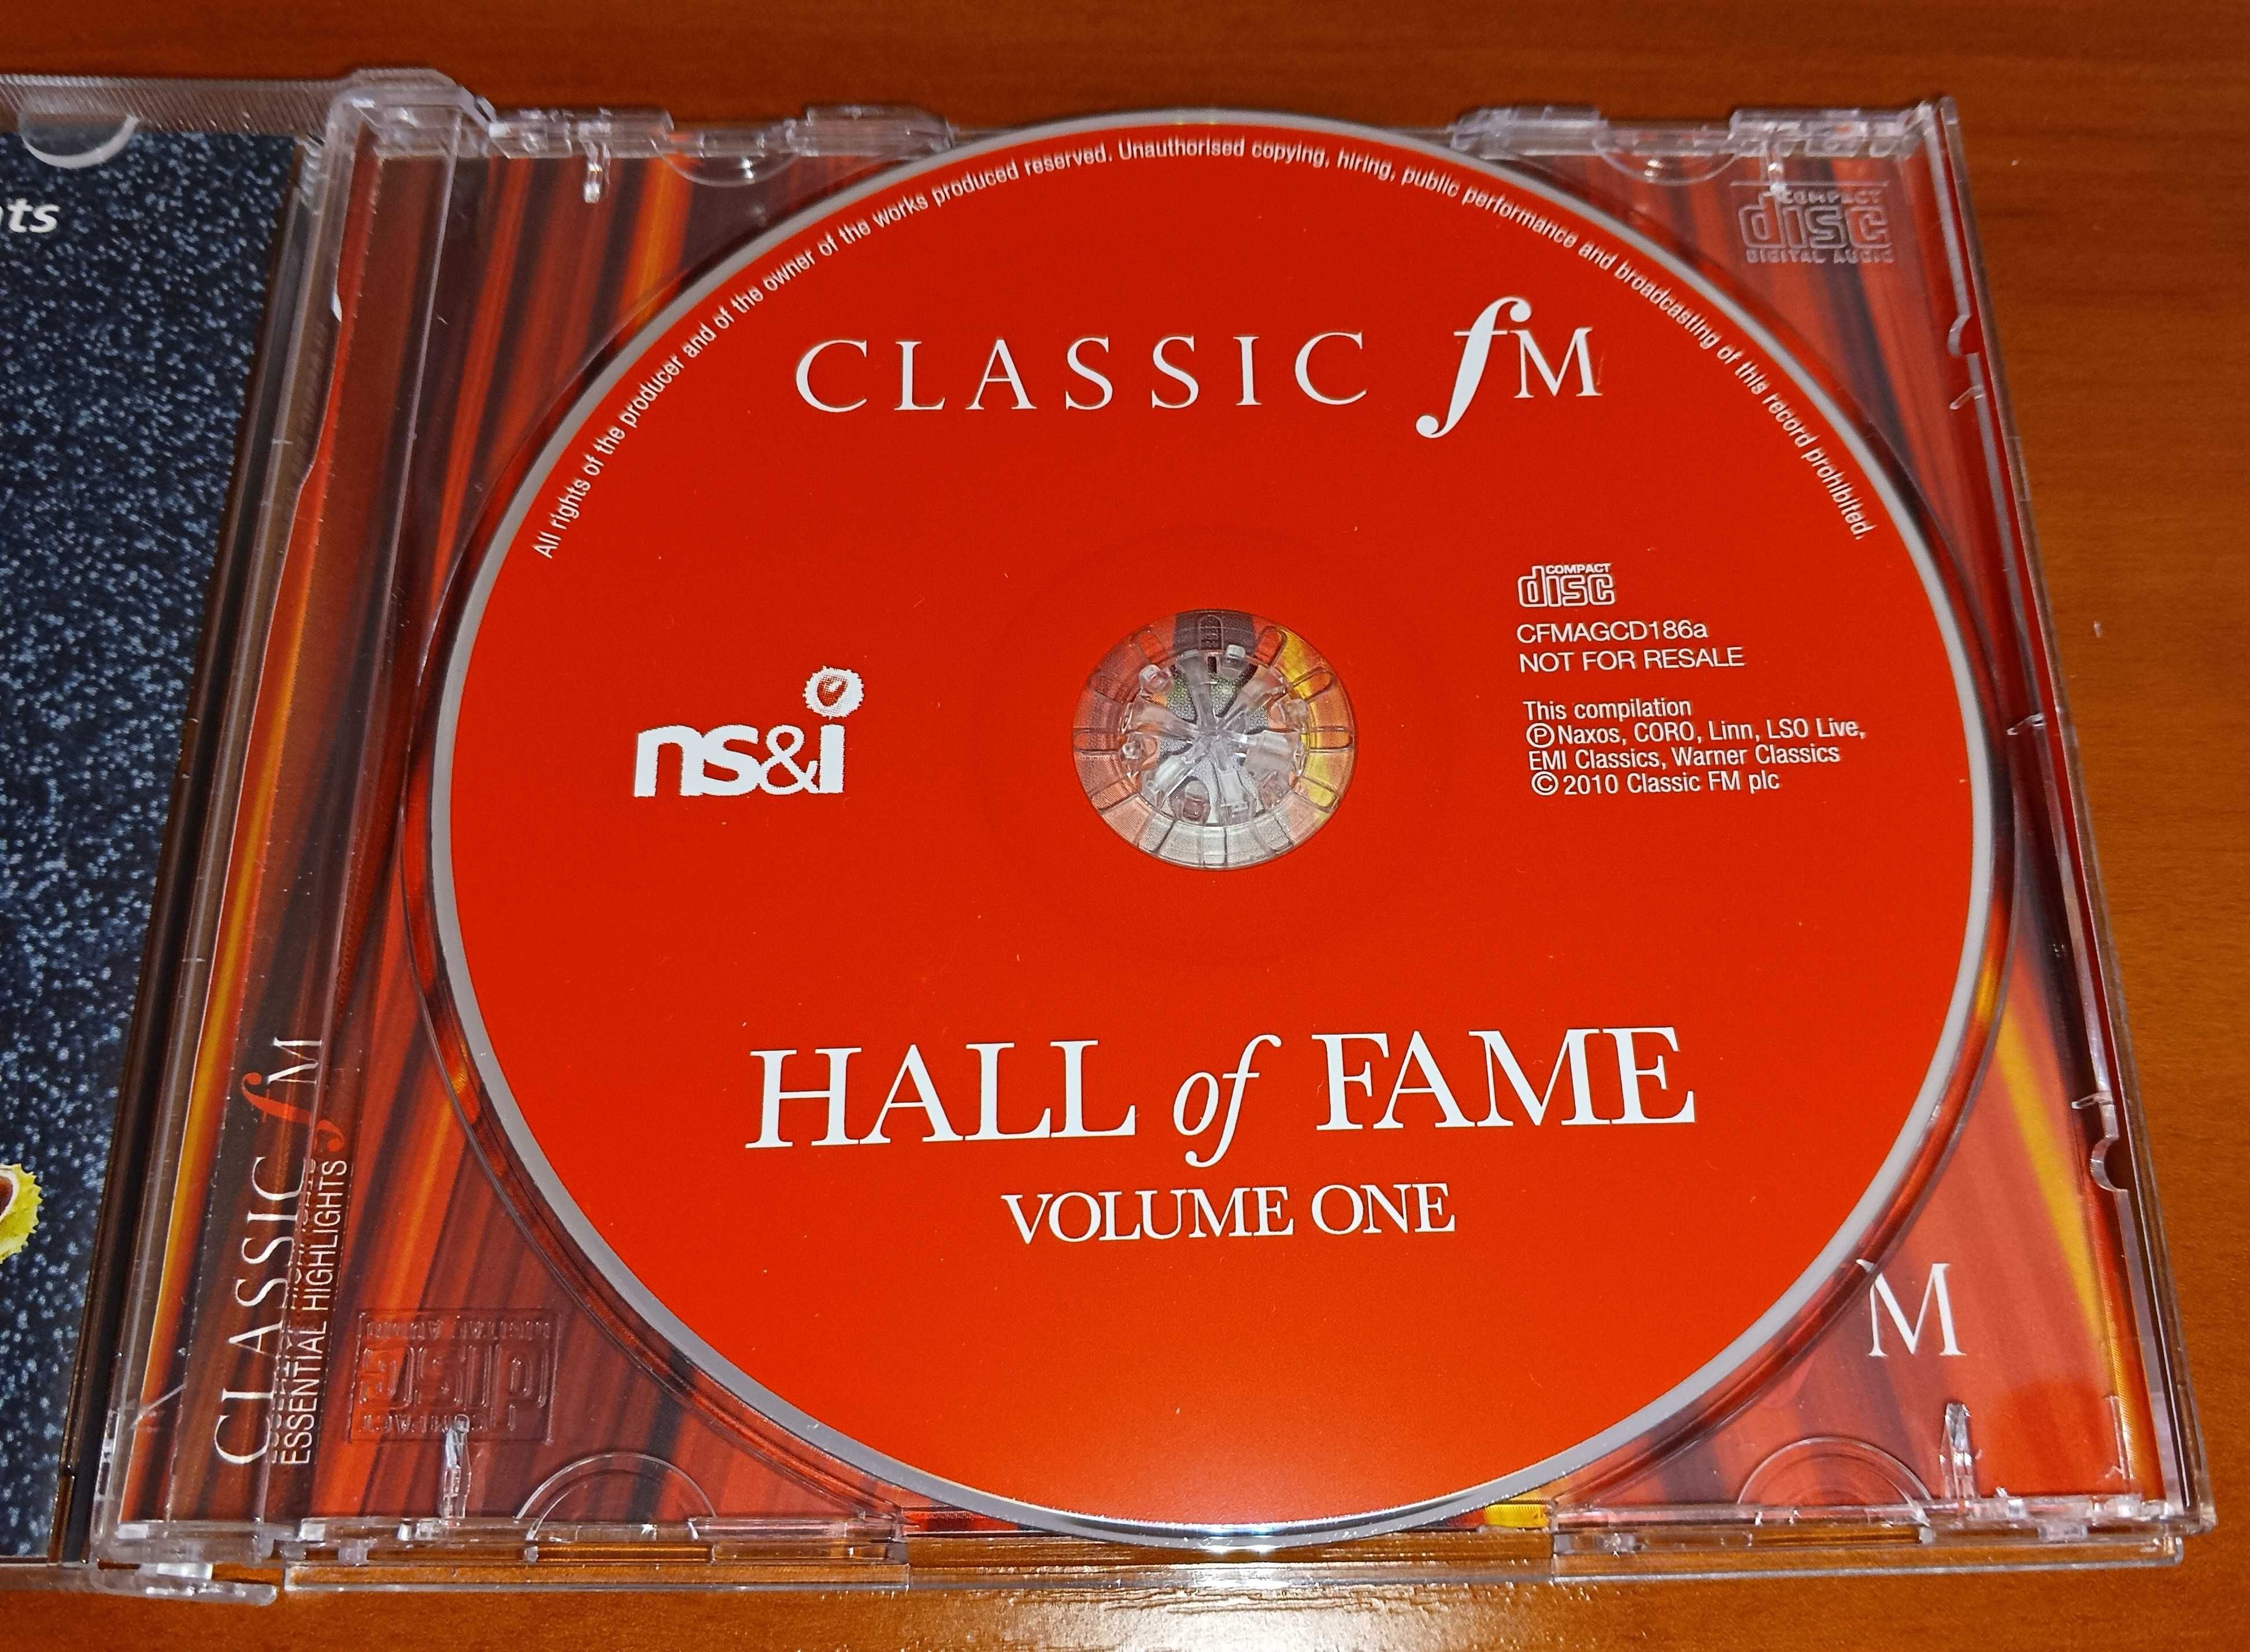 CD Hall of Fame - Hits 2010 volume one (Classic FM)